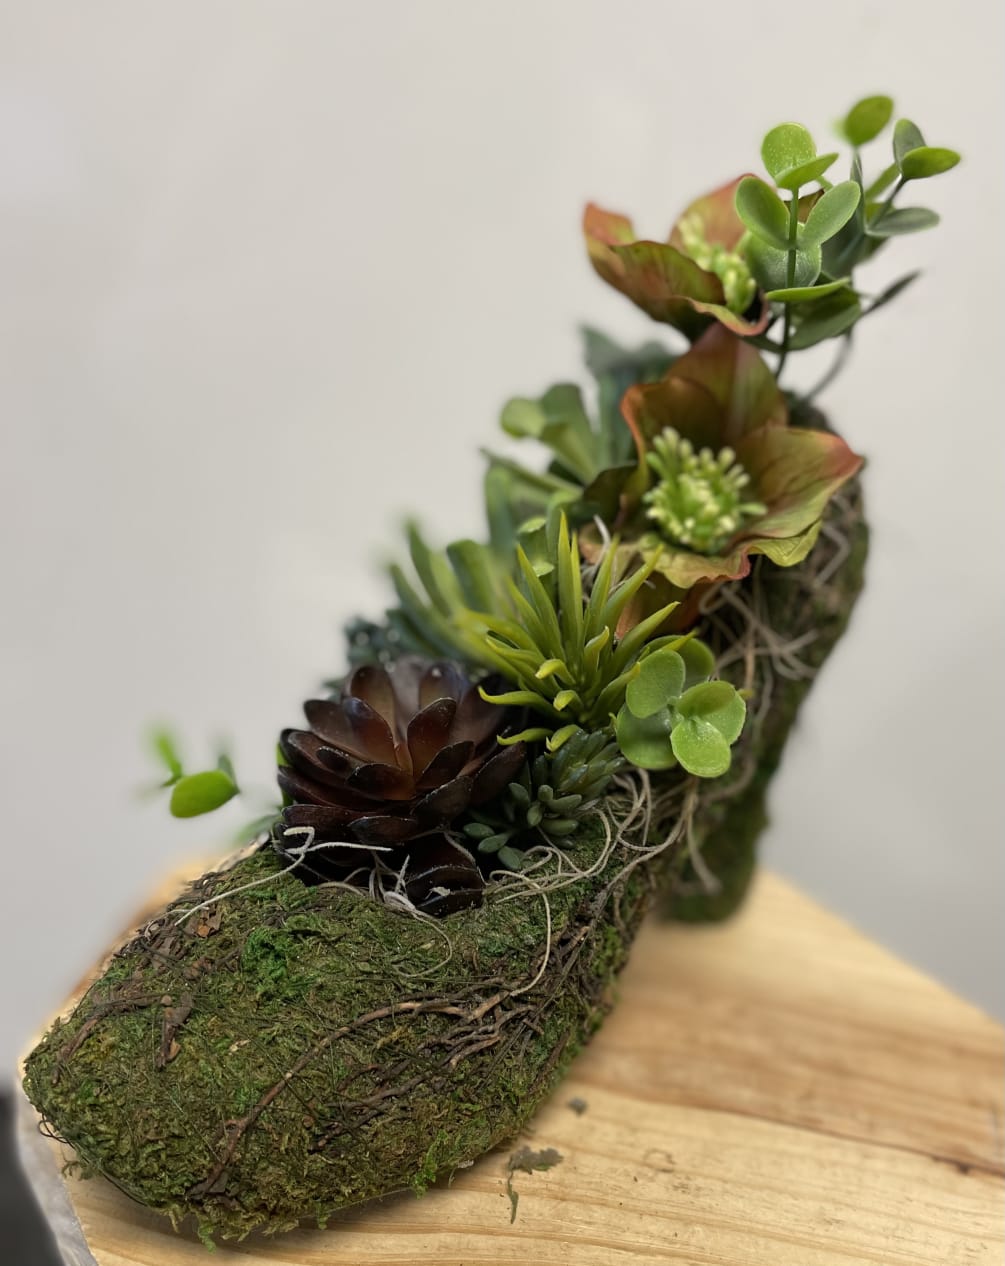 This cool moss shoe is filled with permanent botanical succulents.
Don&#039;t have a